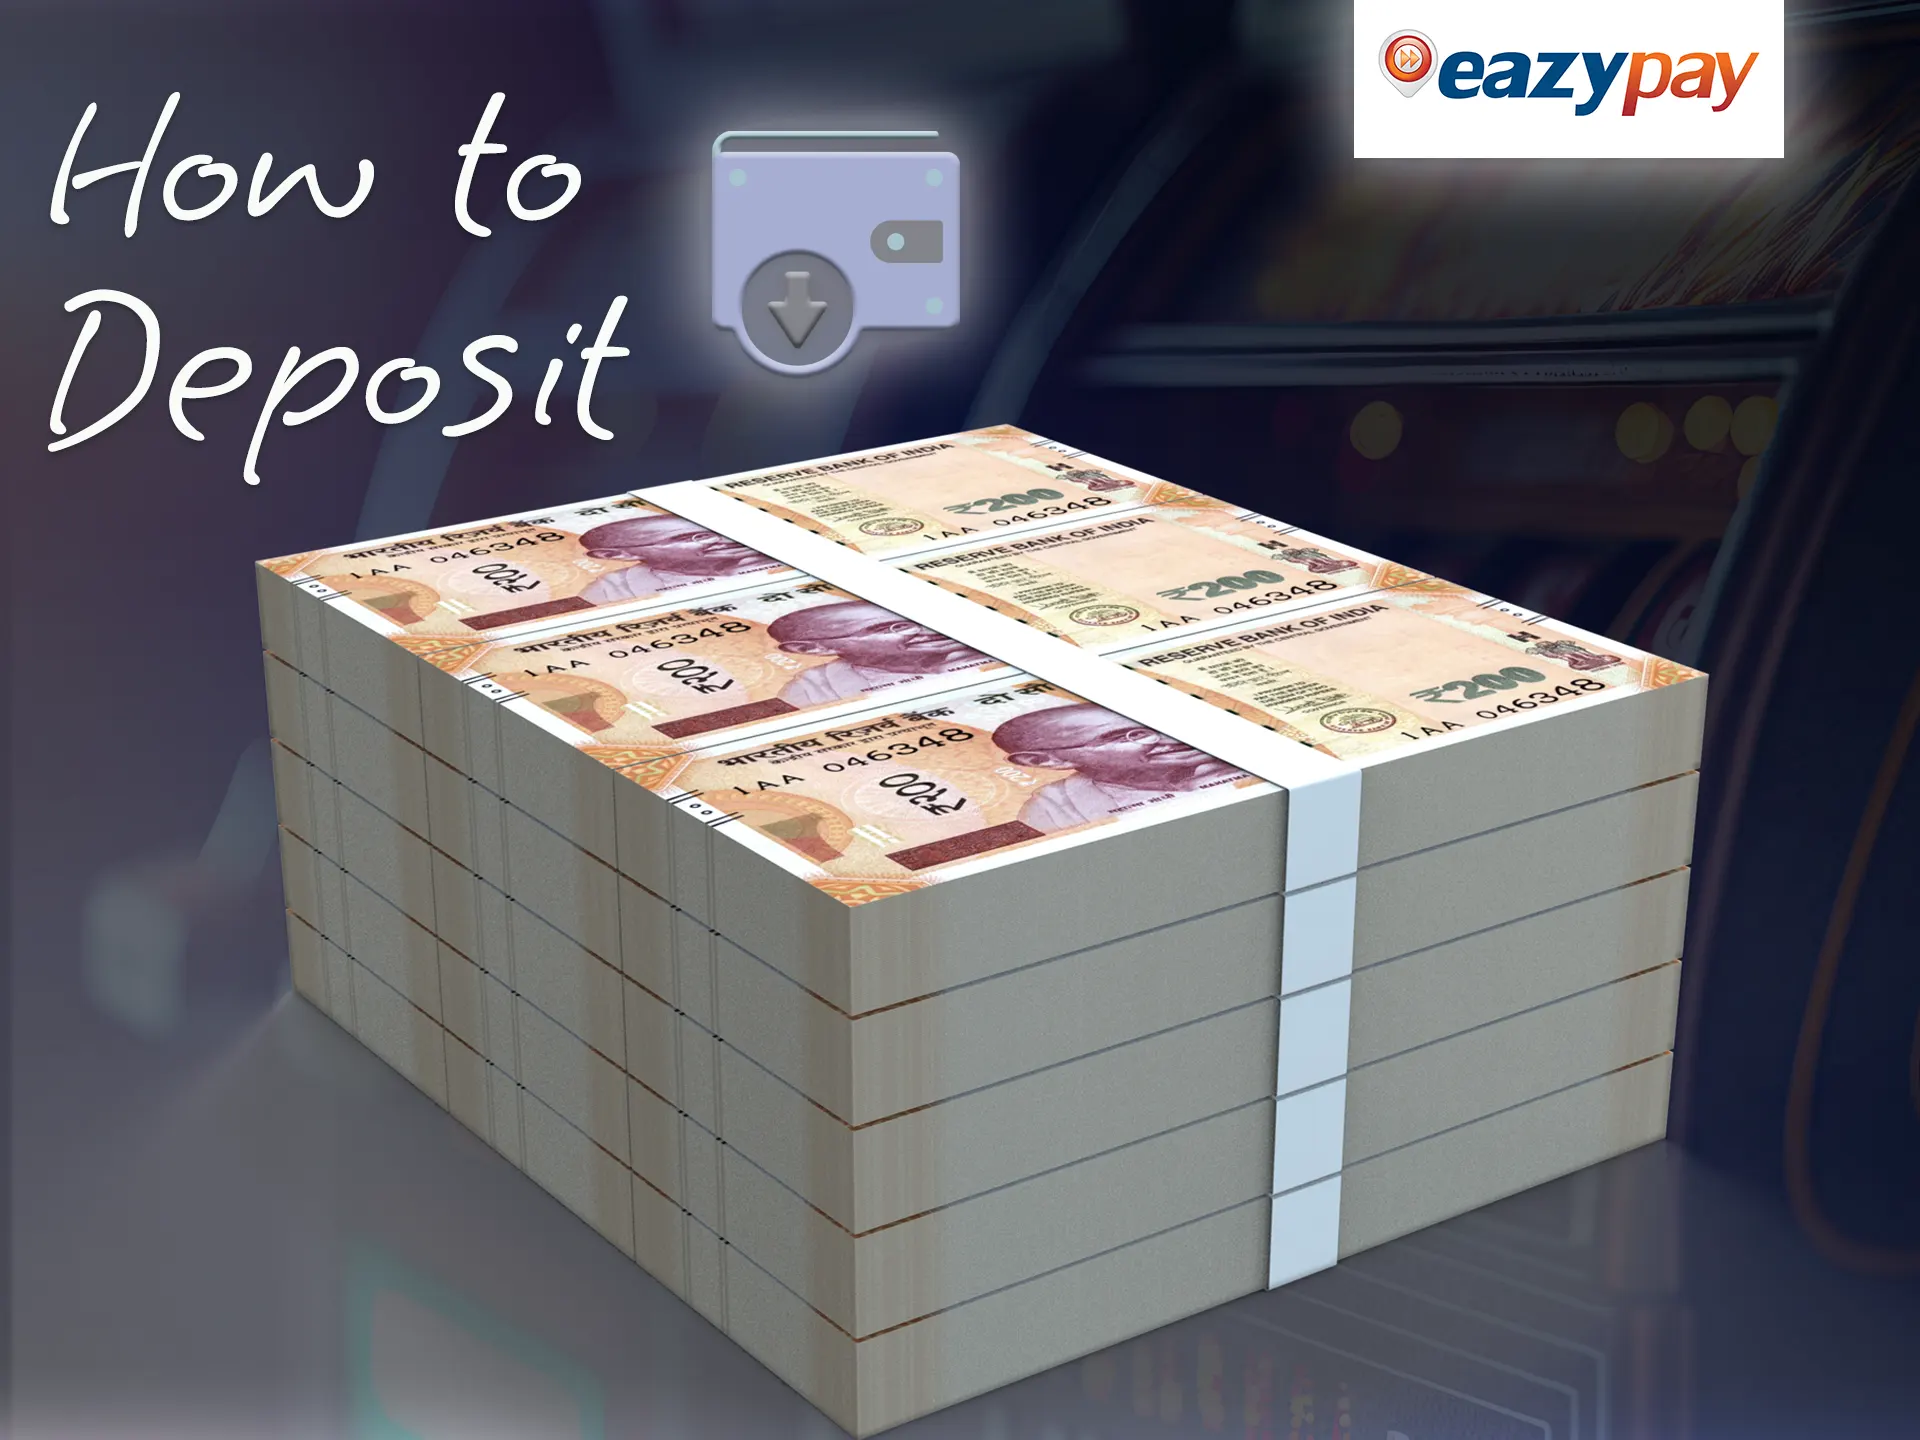 Fund your account using EazyPay.